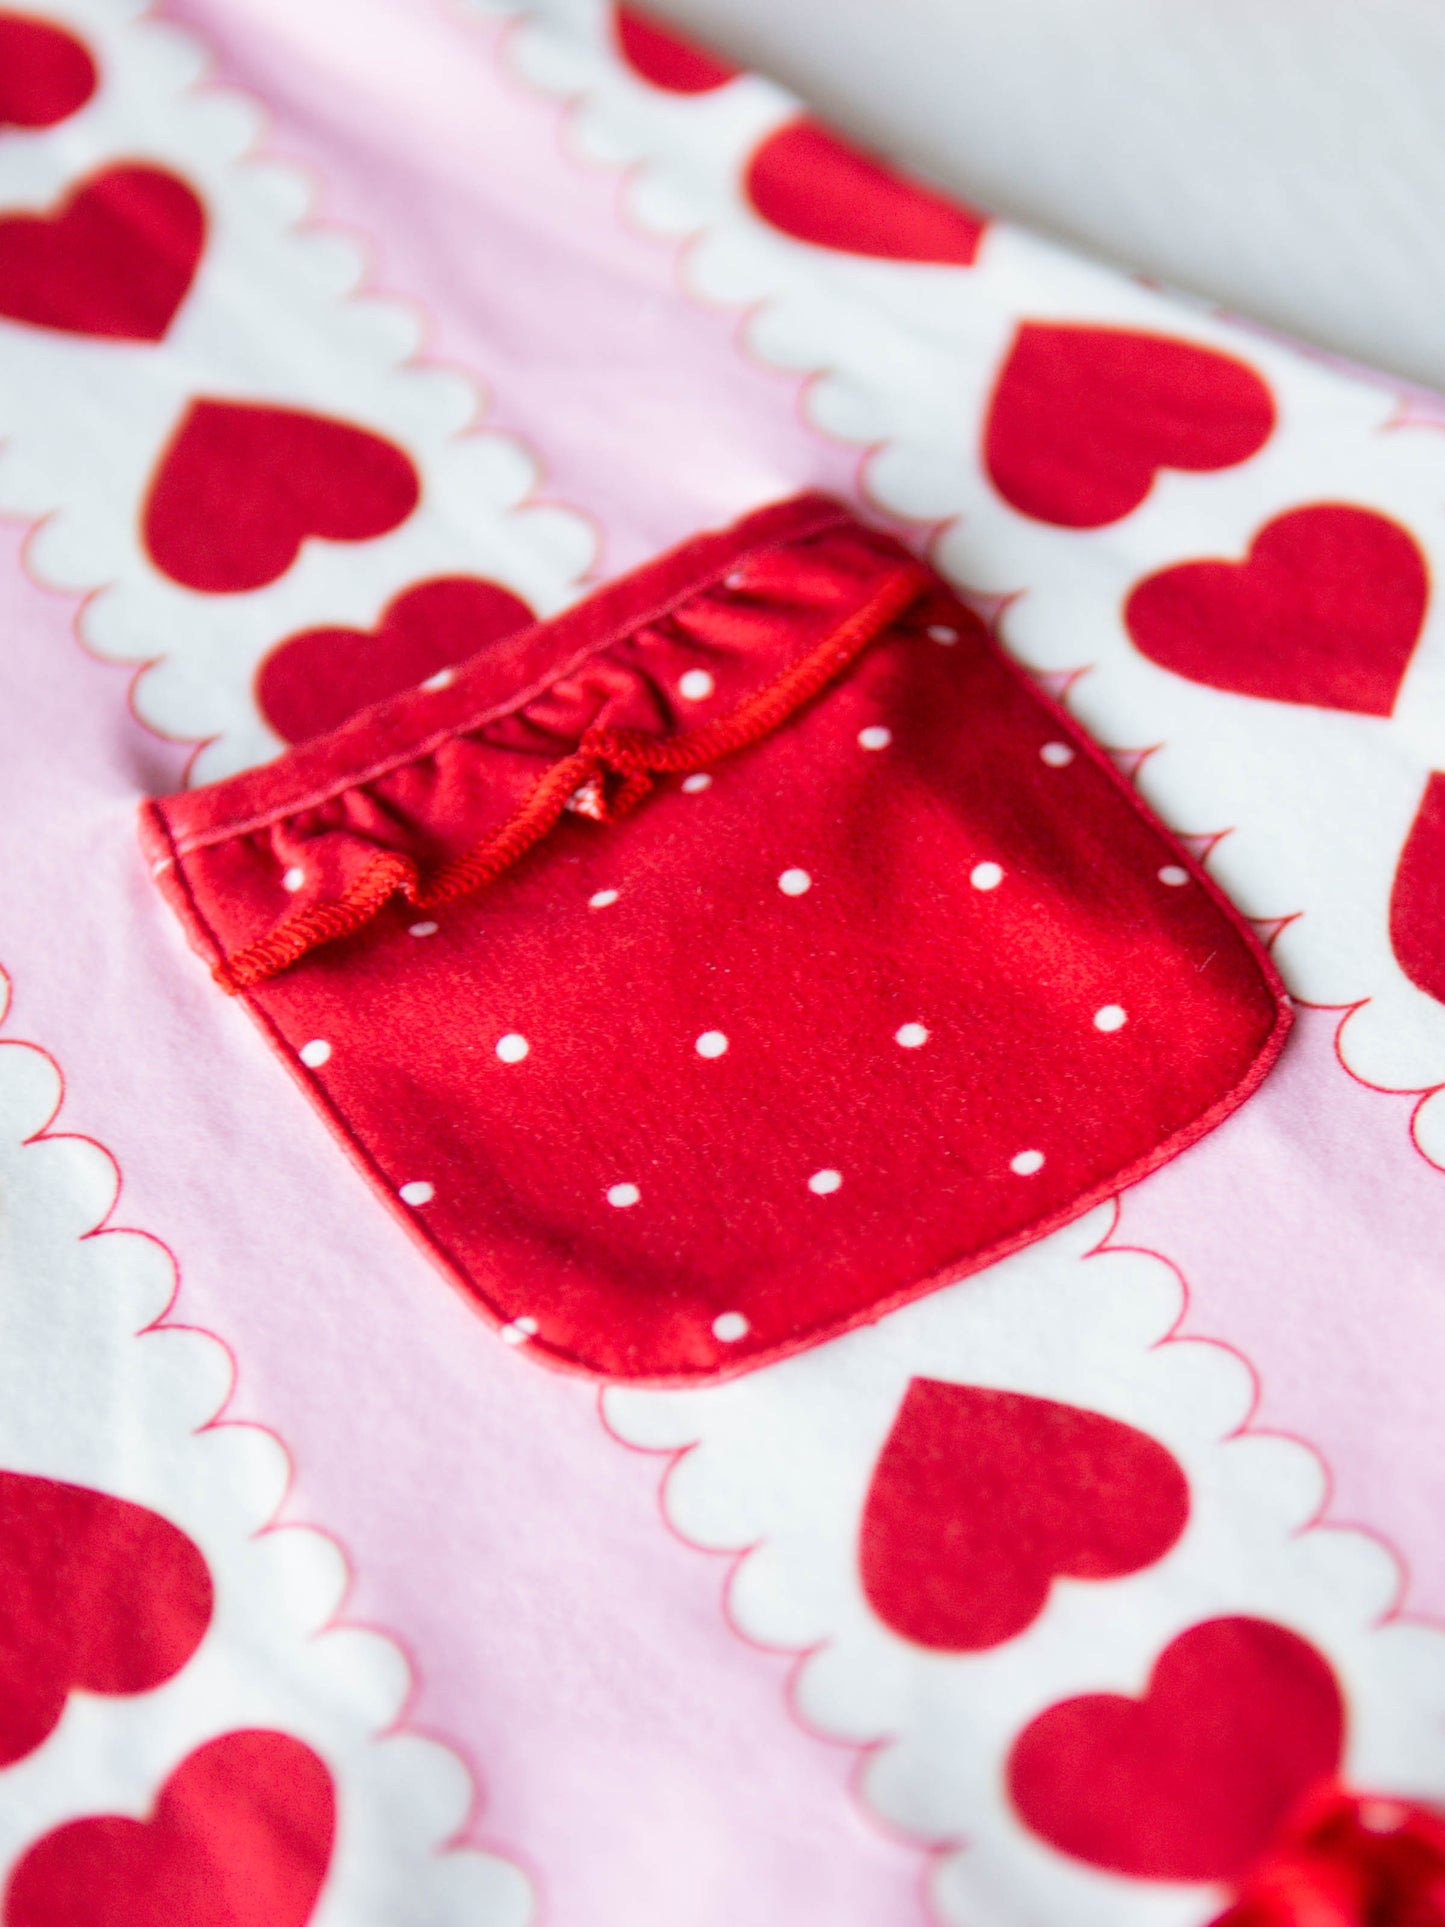 Everyday Play Dress - Blushing Mirrored Hearts